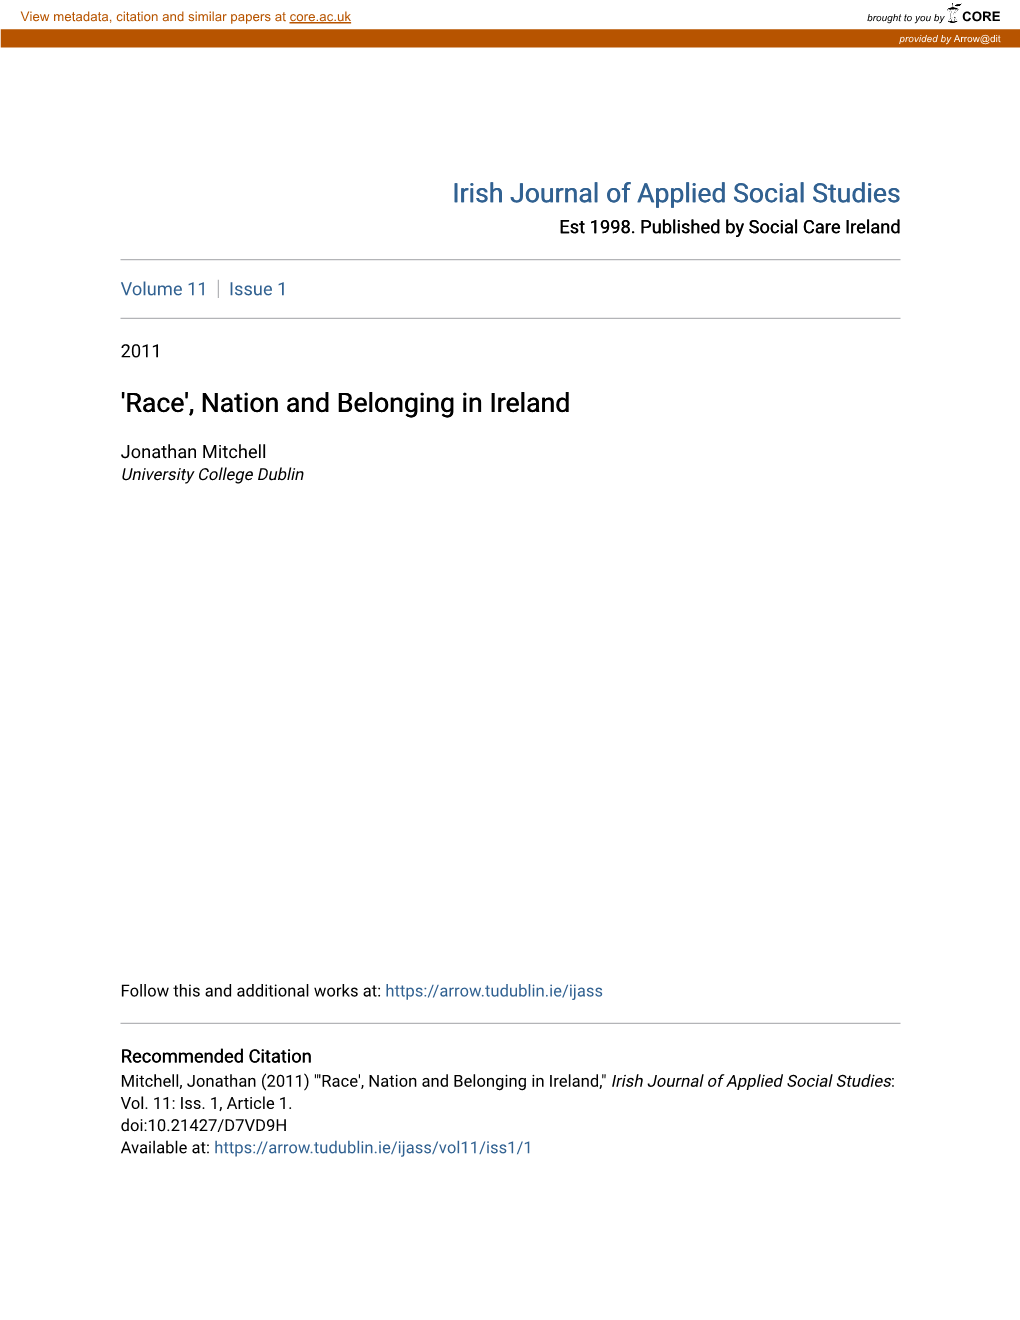 Race', Nation and Belonging in Ireland